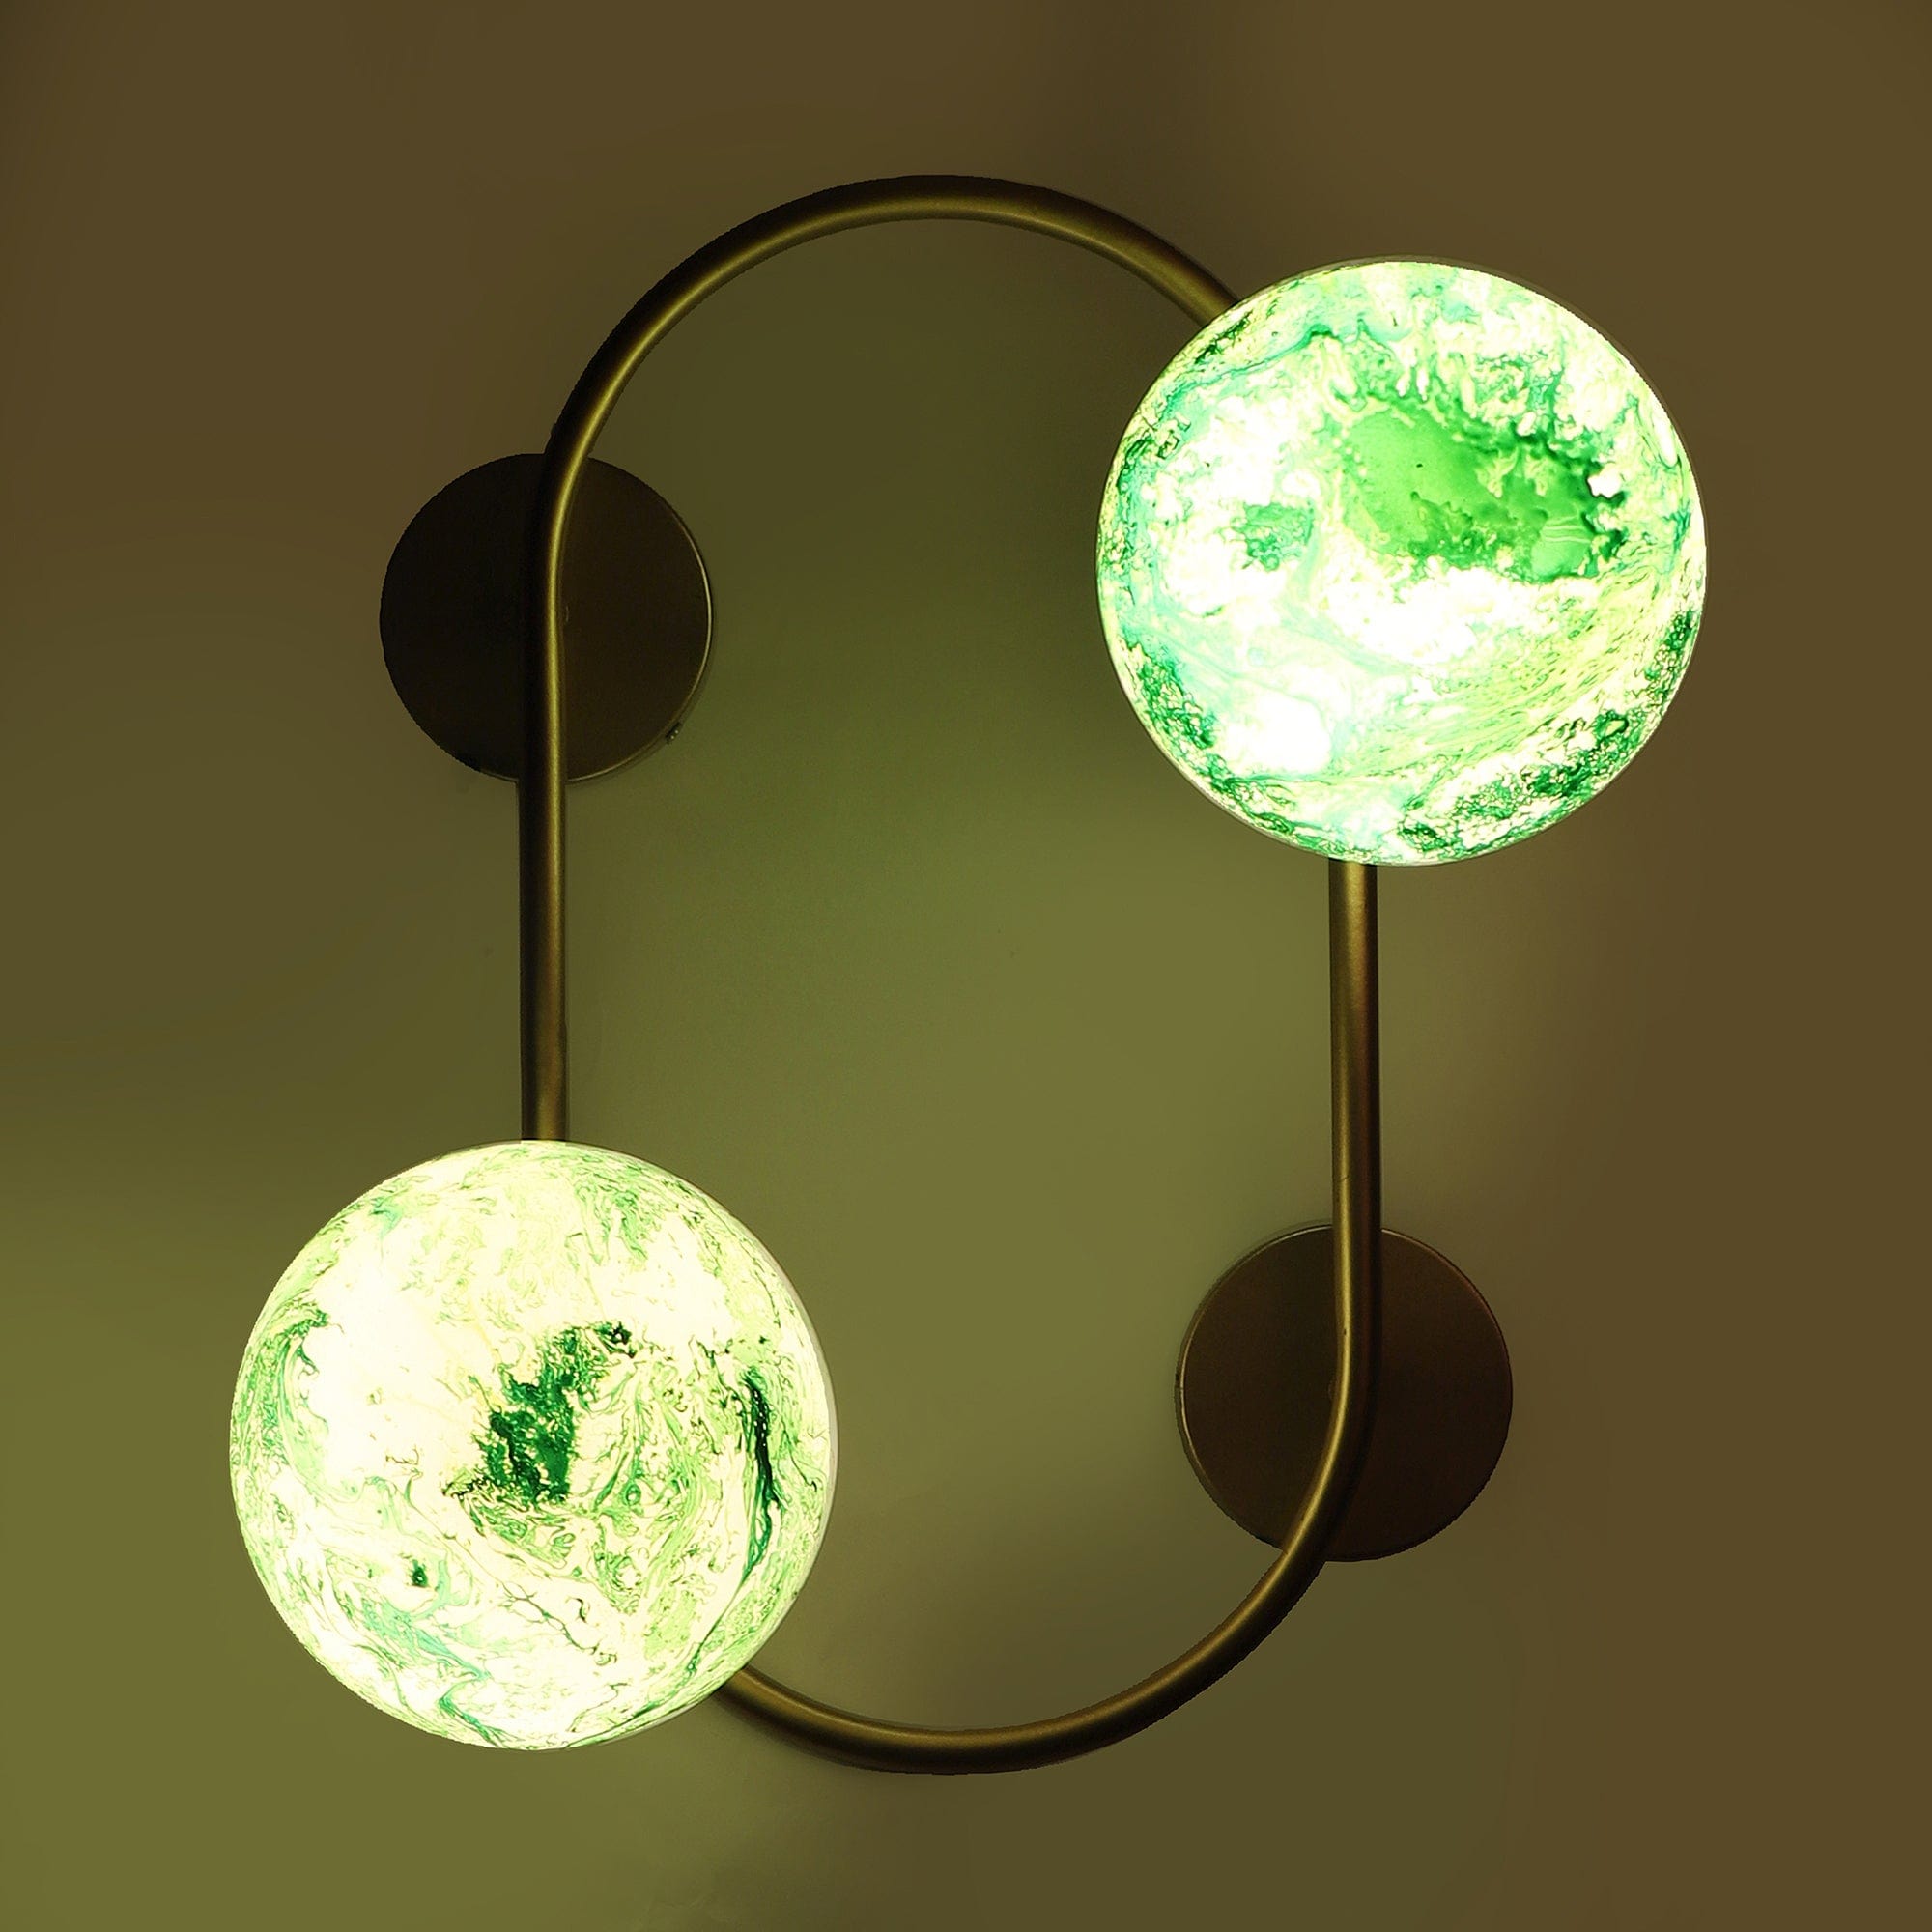 Gold And Green 2 Iron Wall Lights